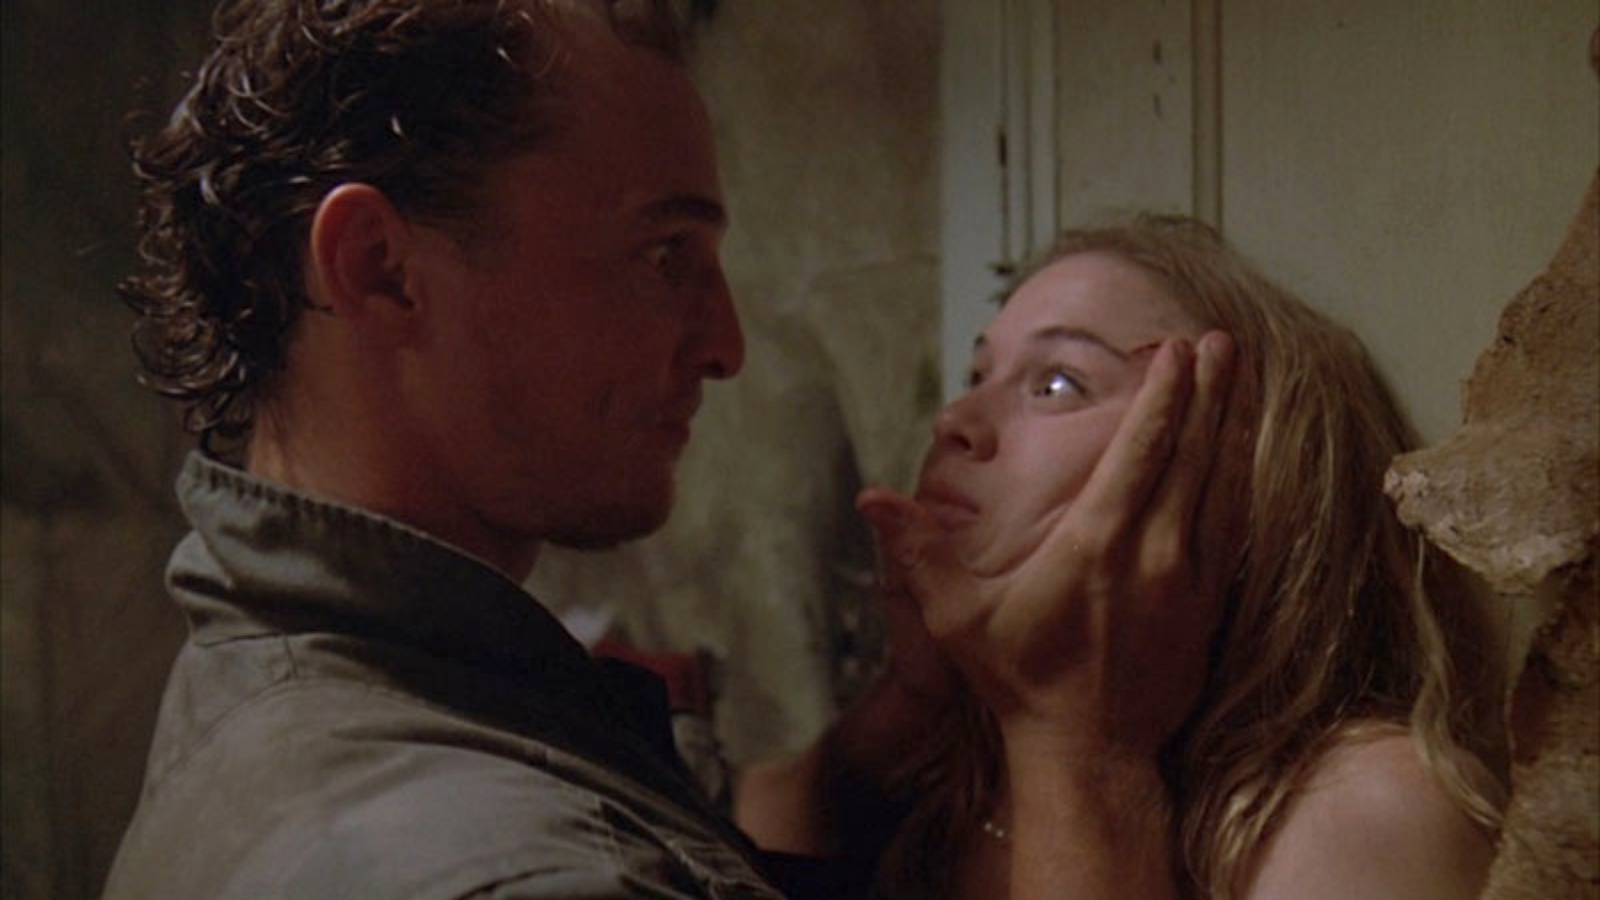 Matthew McConaughey and Renée Zellweger in The Texas Chainsaw Massacre: The Next Generation